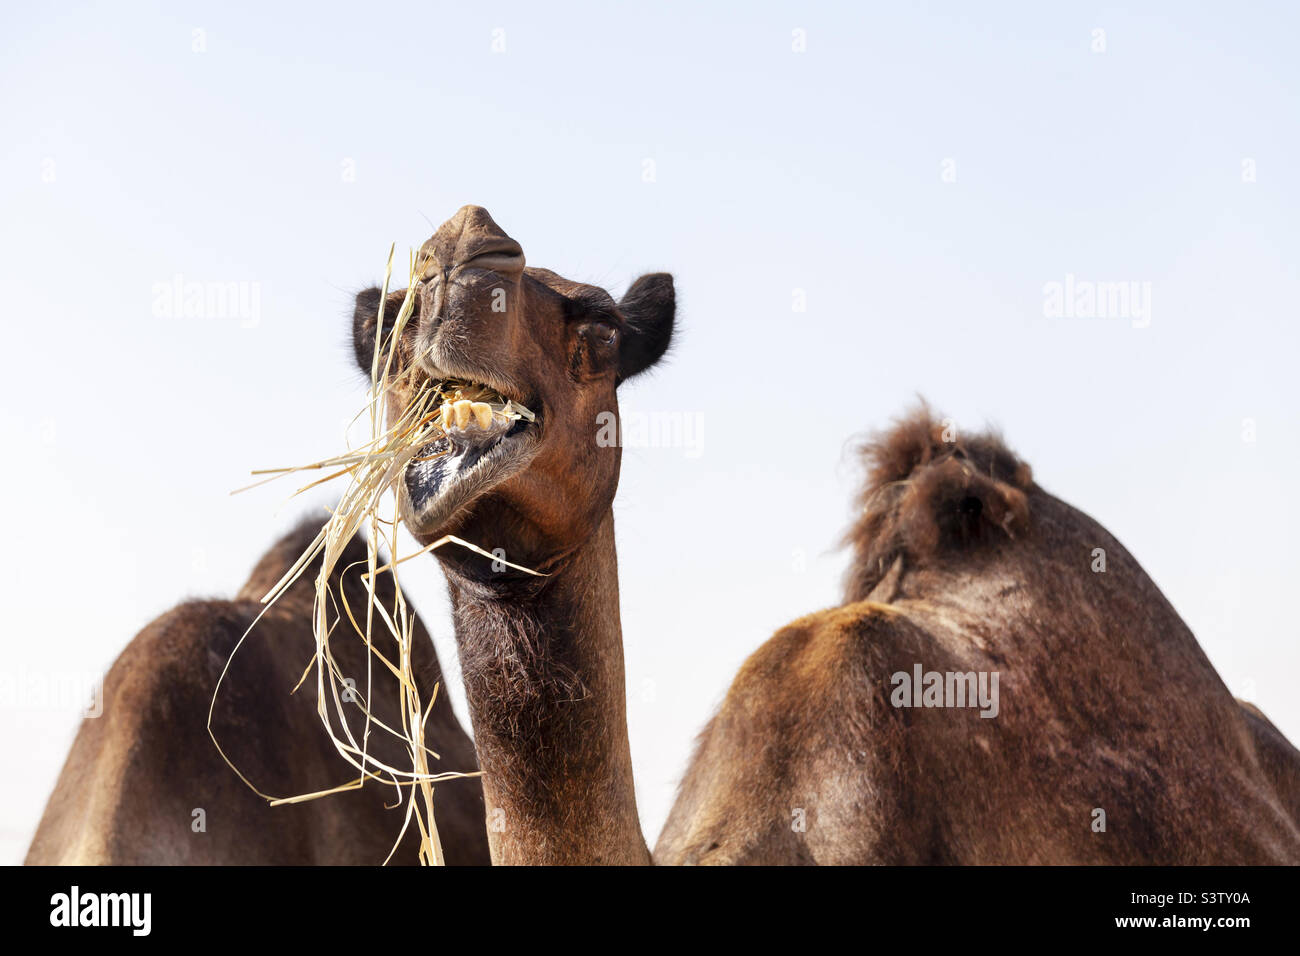 Funny camel chewing dried grass in the desert, animal portrait Stock Photo